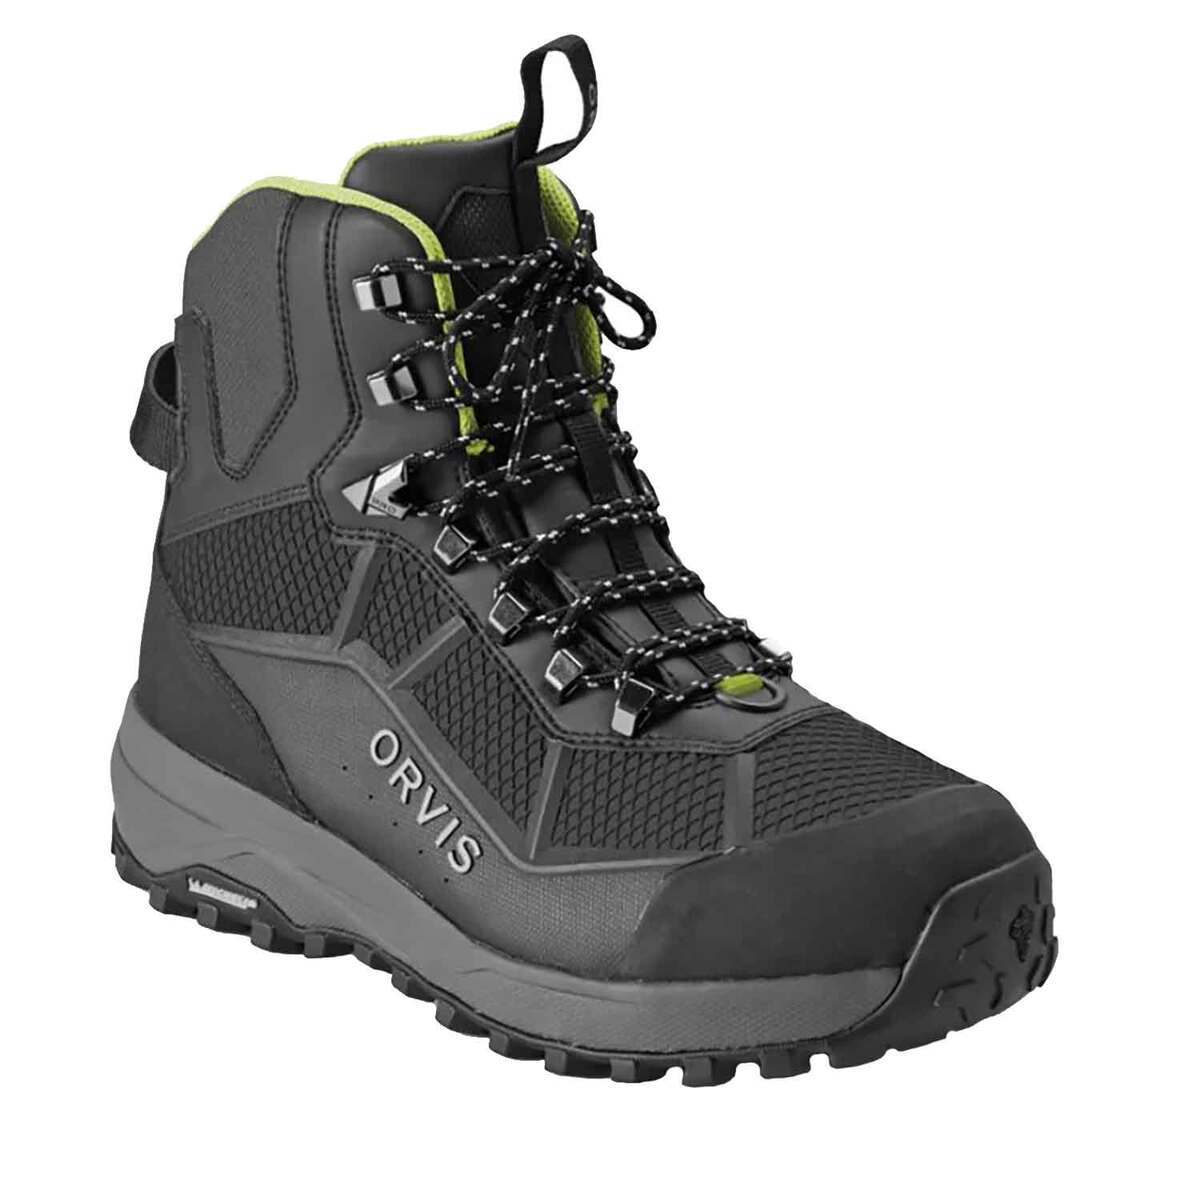 Orvis Pro Hybrid Wading Boots, Shadow / 10